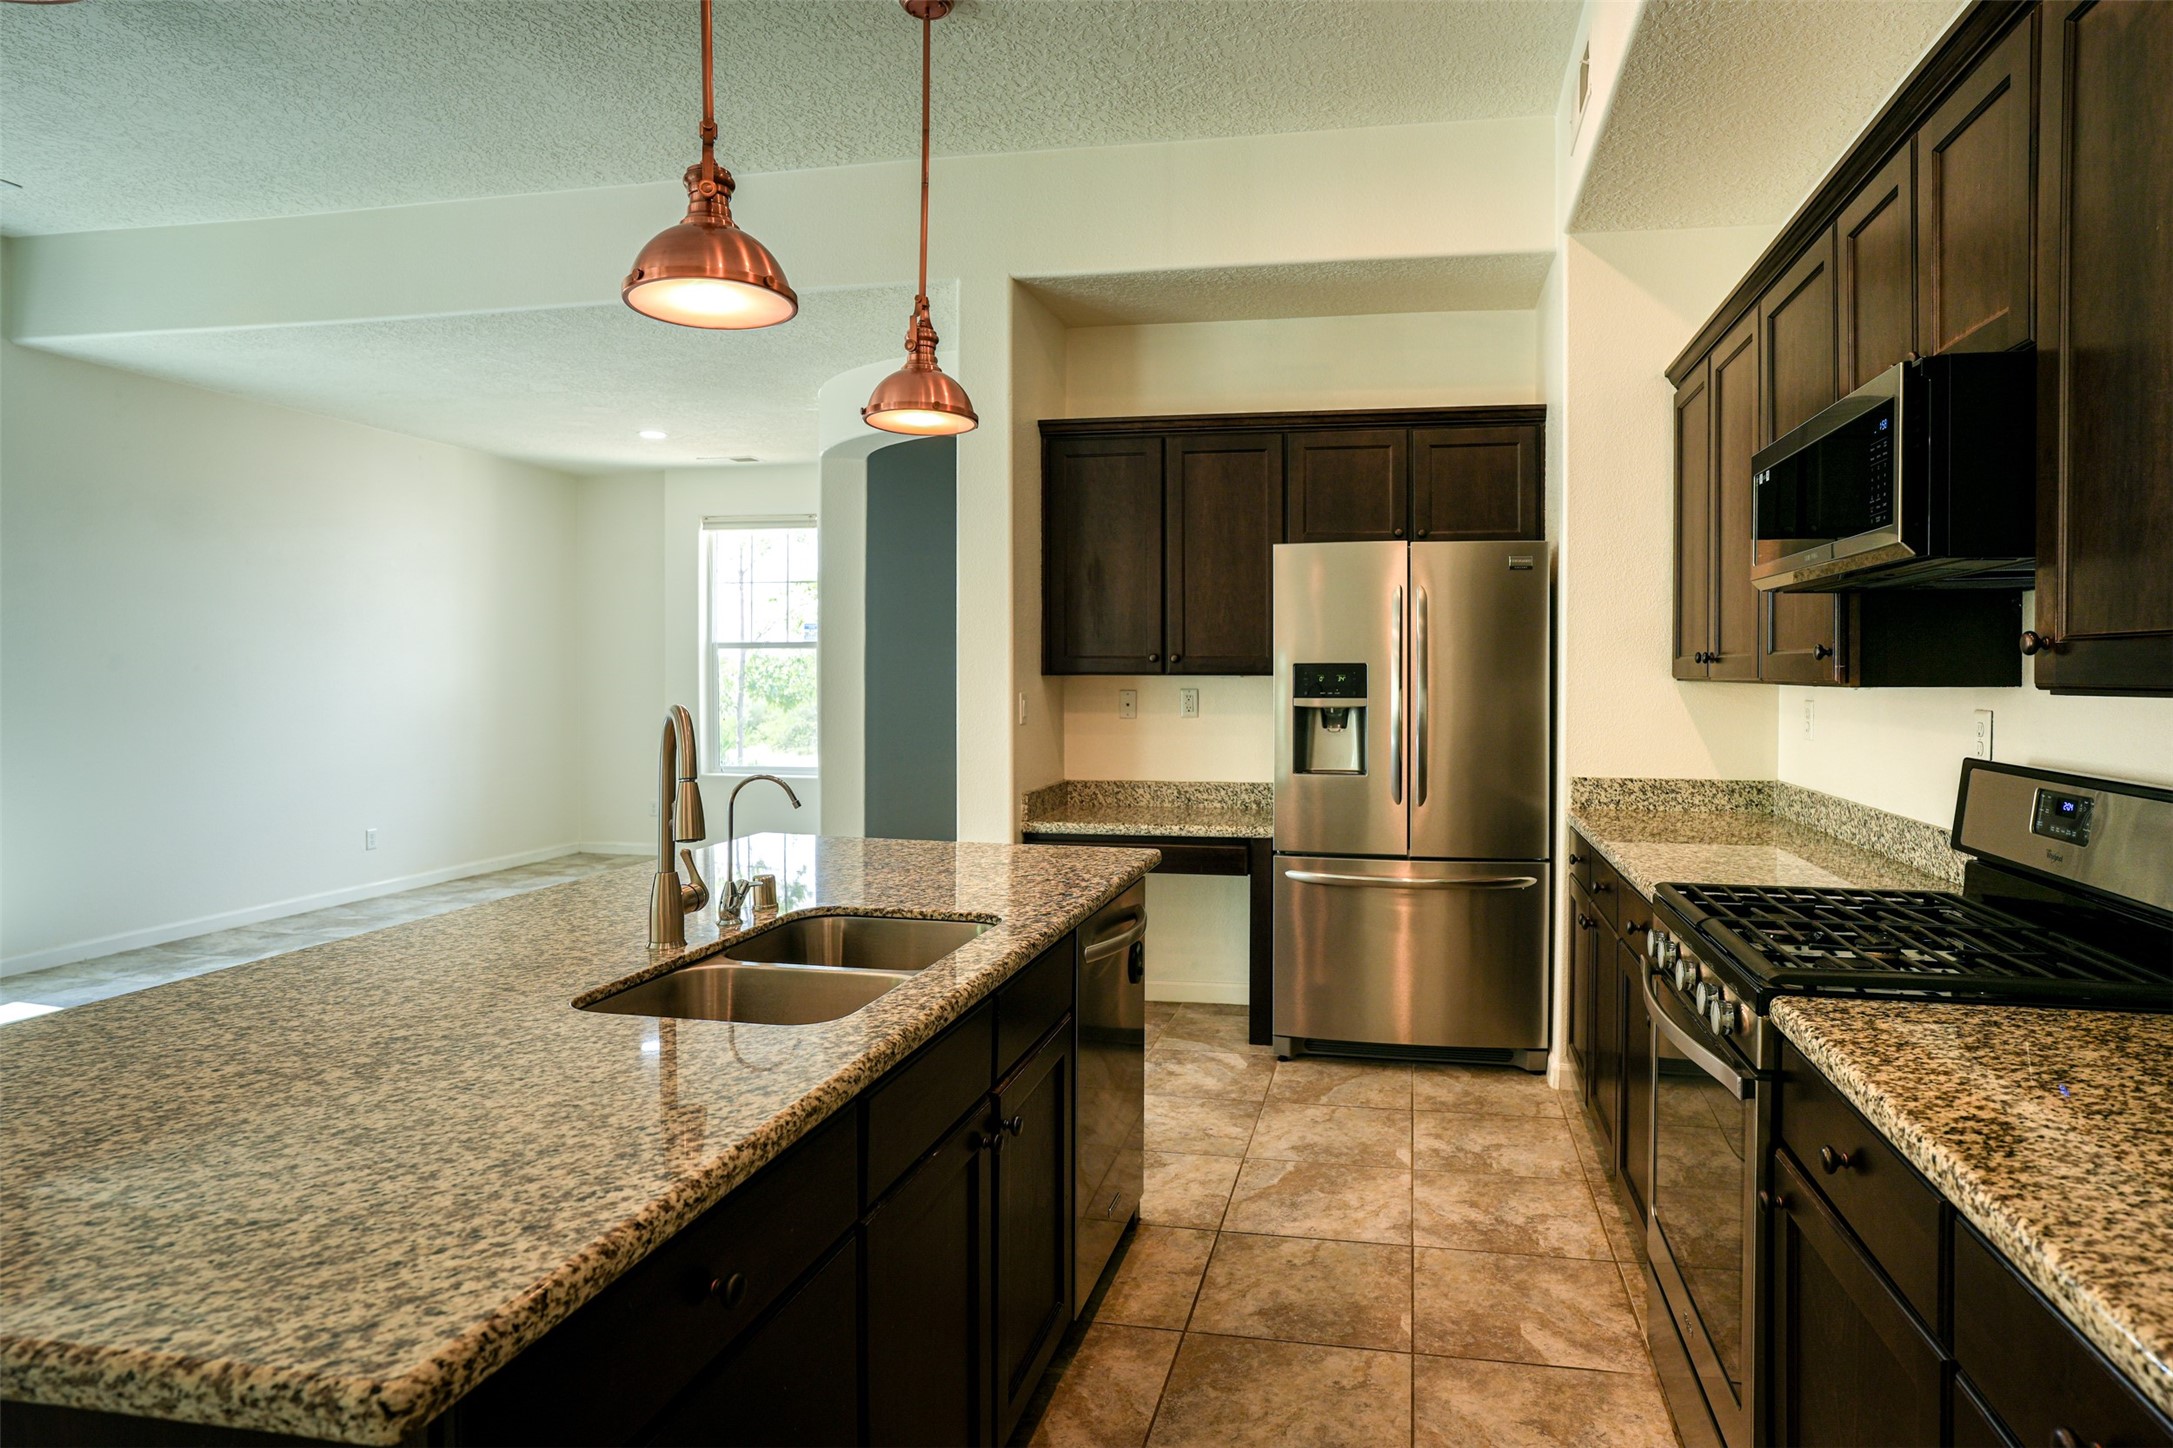 KITCHEN WITH STAINLESS STEEL APPLIANCES, GRANITE COUNTERTOPS & ISLAND COUNTER